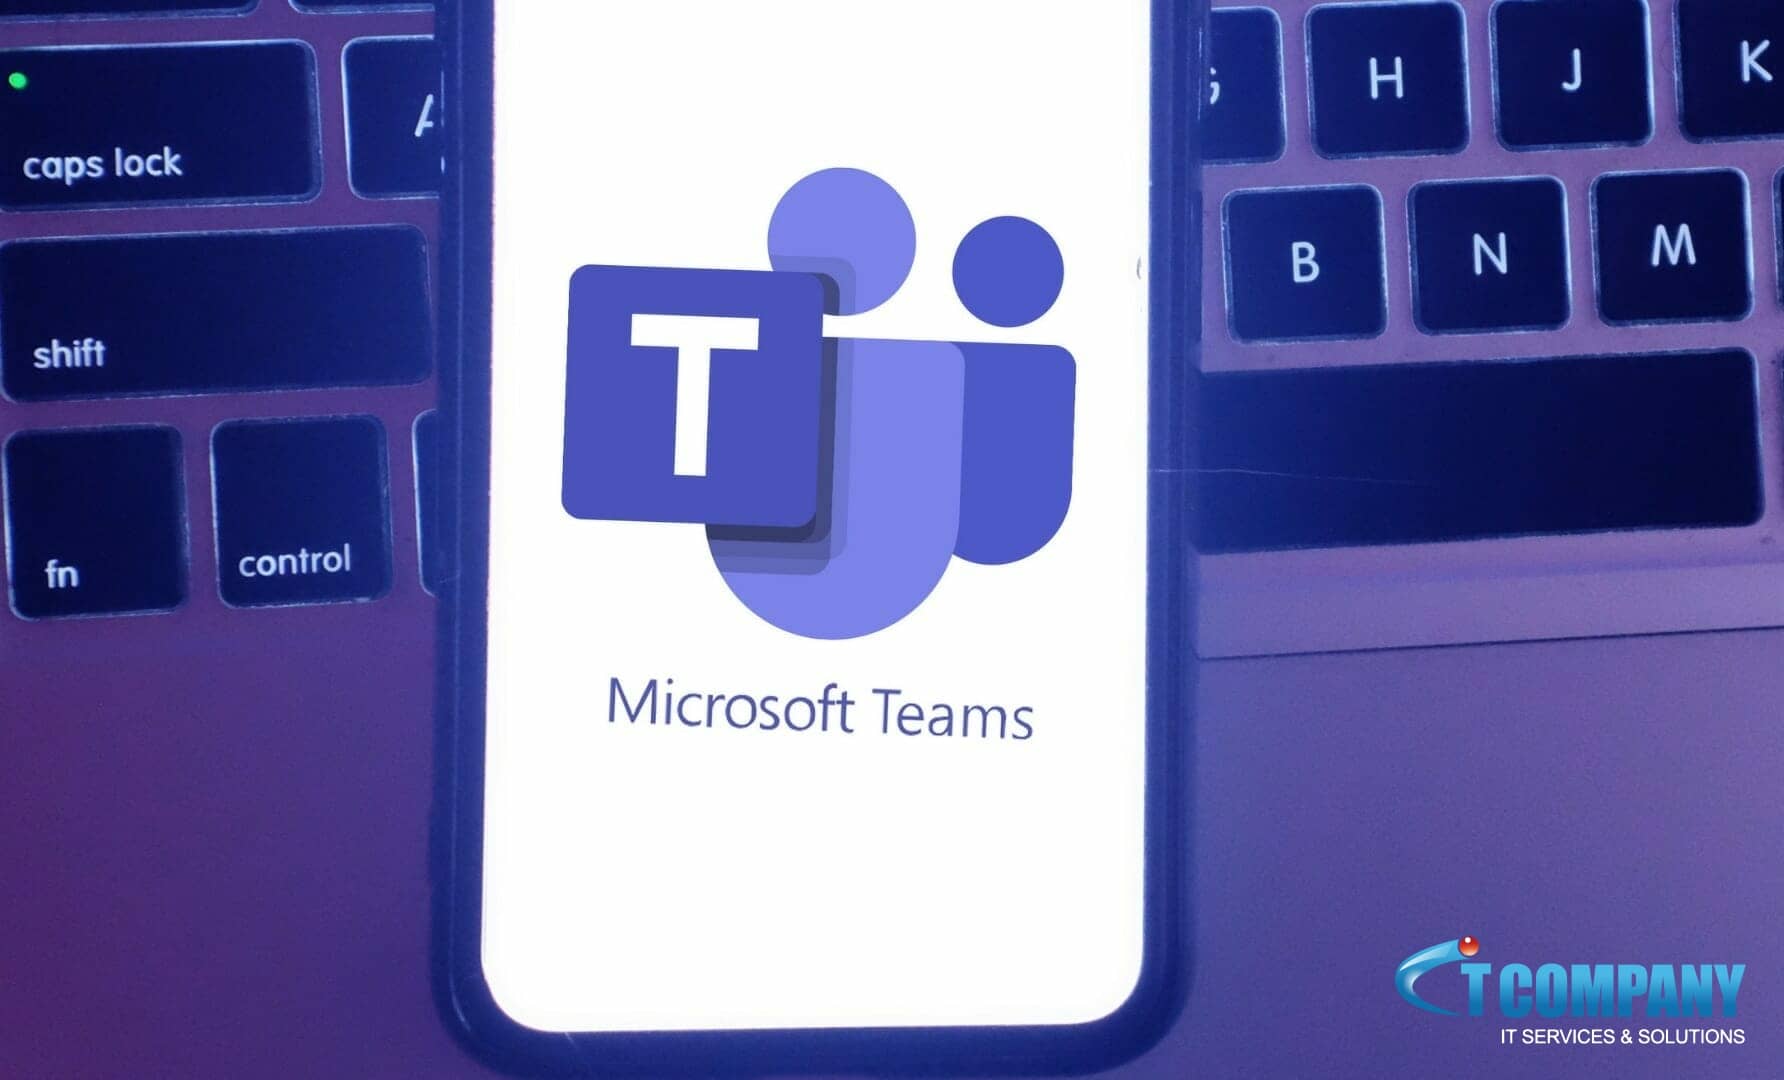 Microsoft Teams is coming up with a new feature to help your businesses